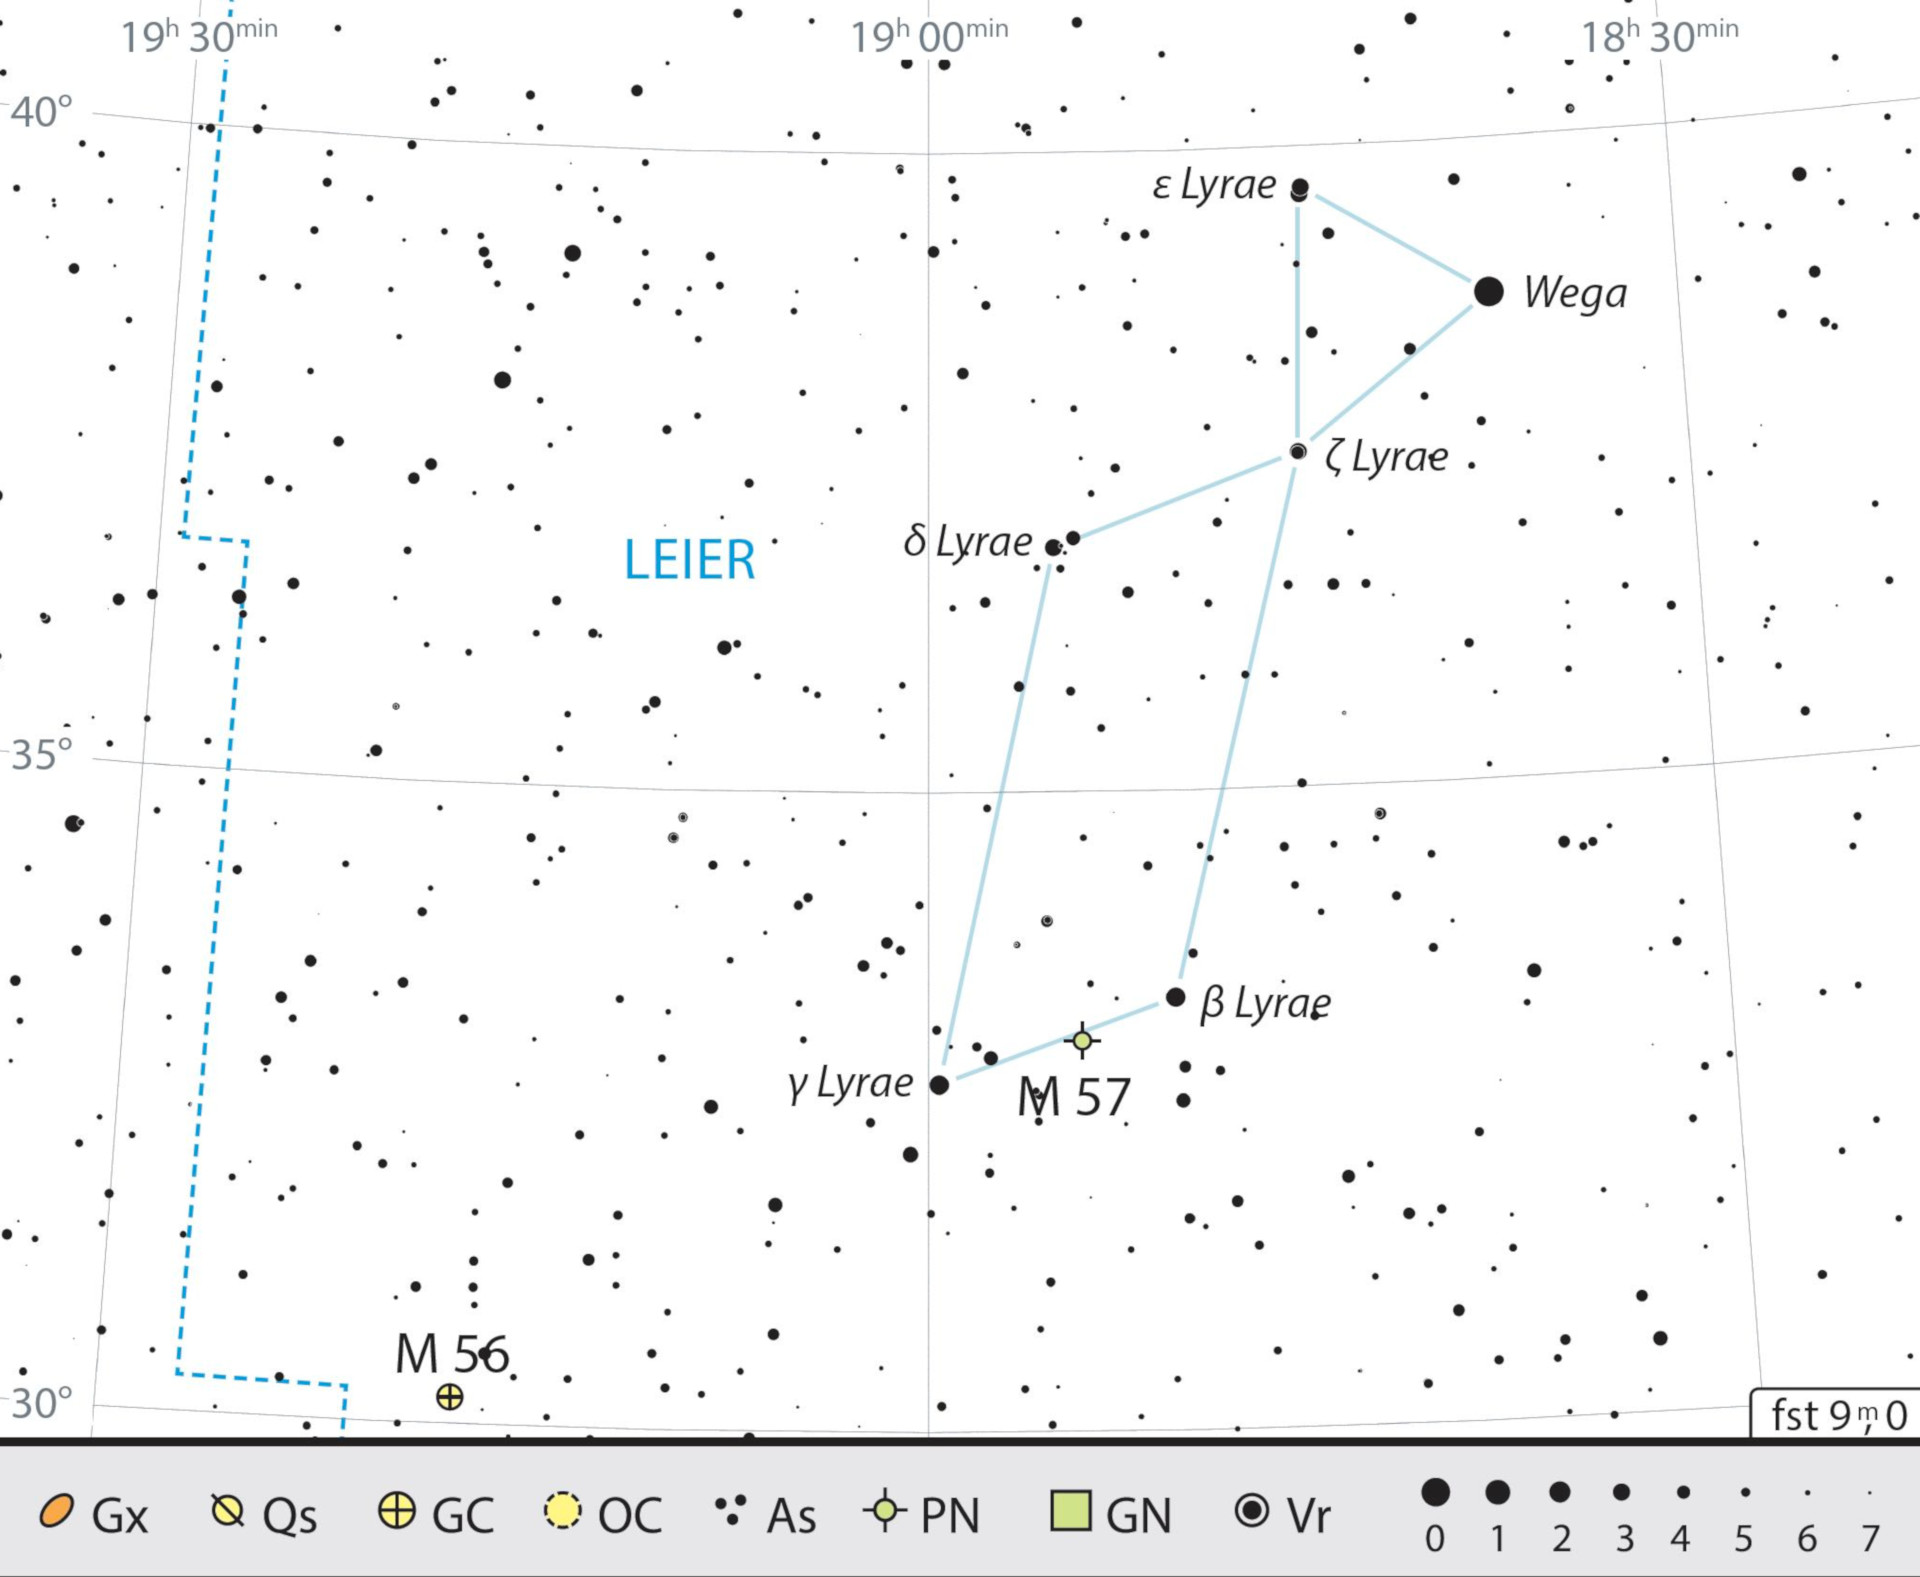 Outline map of the constellation of Lyra with our observing recommendations. J. Scholten